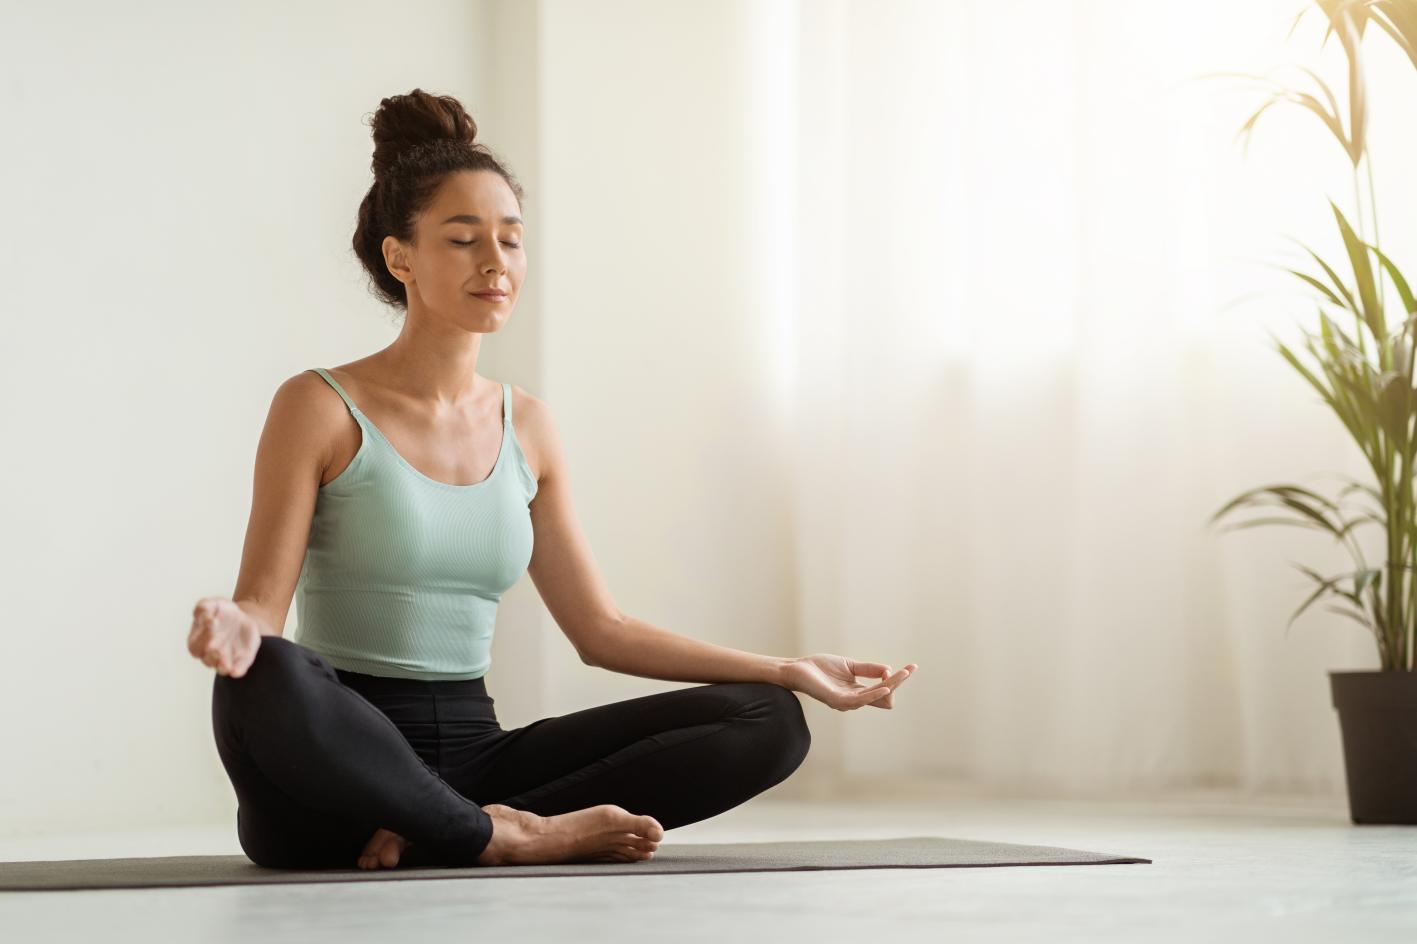 Busy Weekend? Build a Meditation Routine to relax